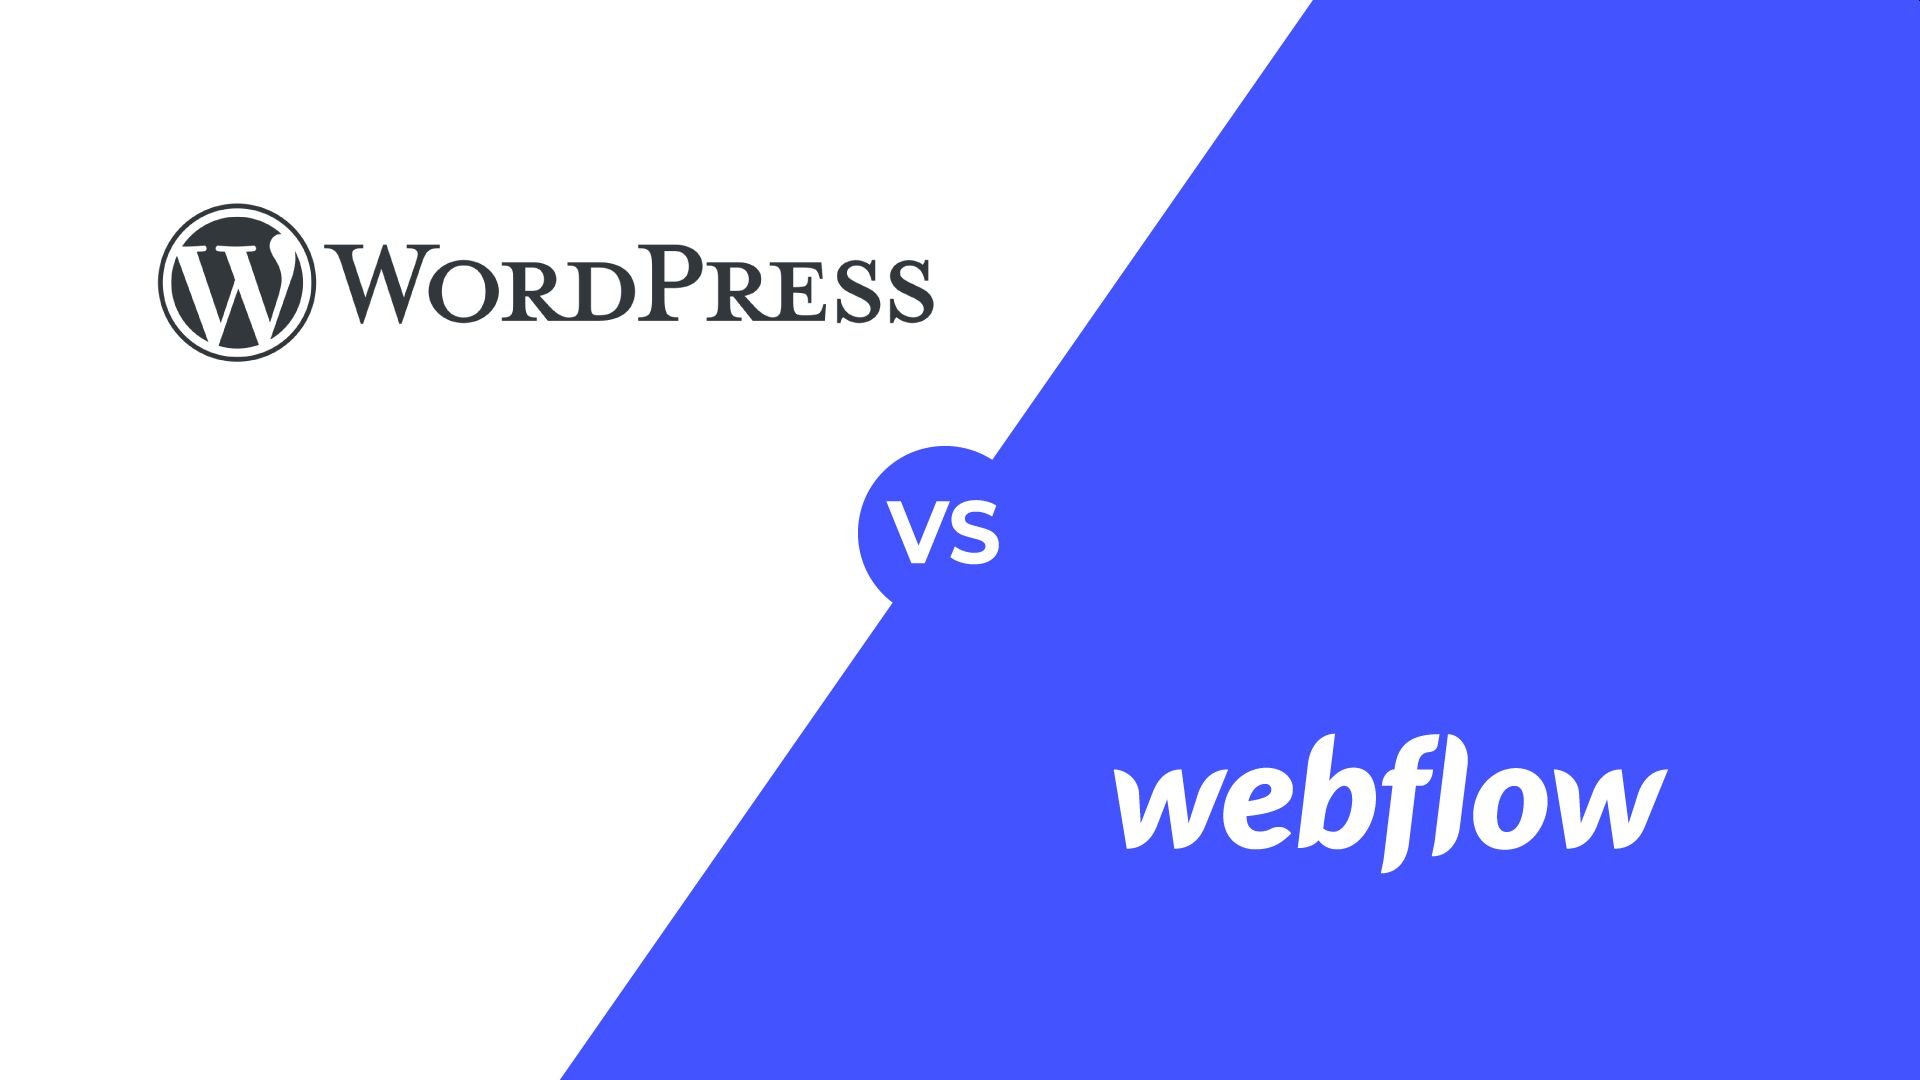 WordPress vs. Webflow: Which Should You Use to Build Your Website?